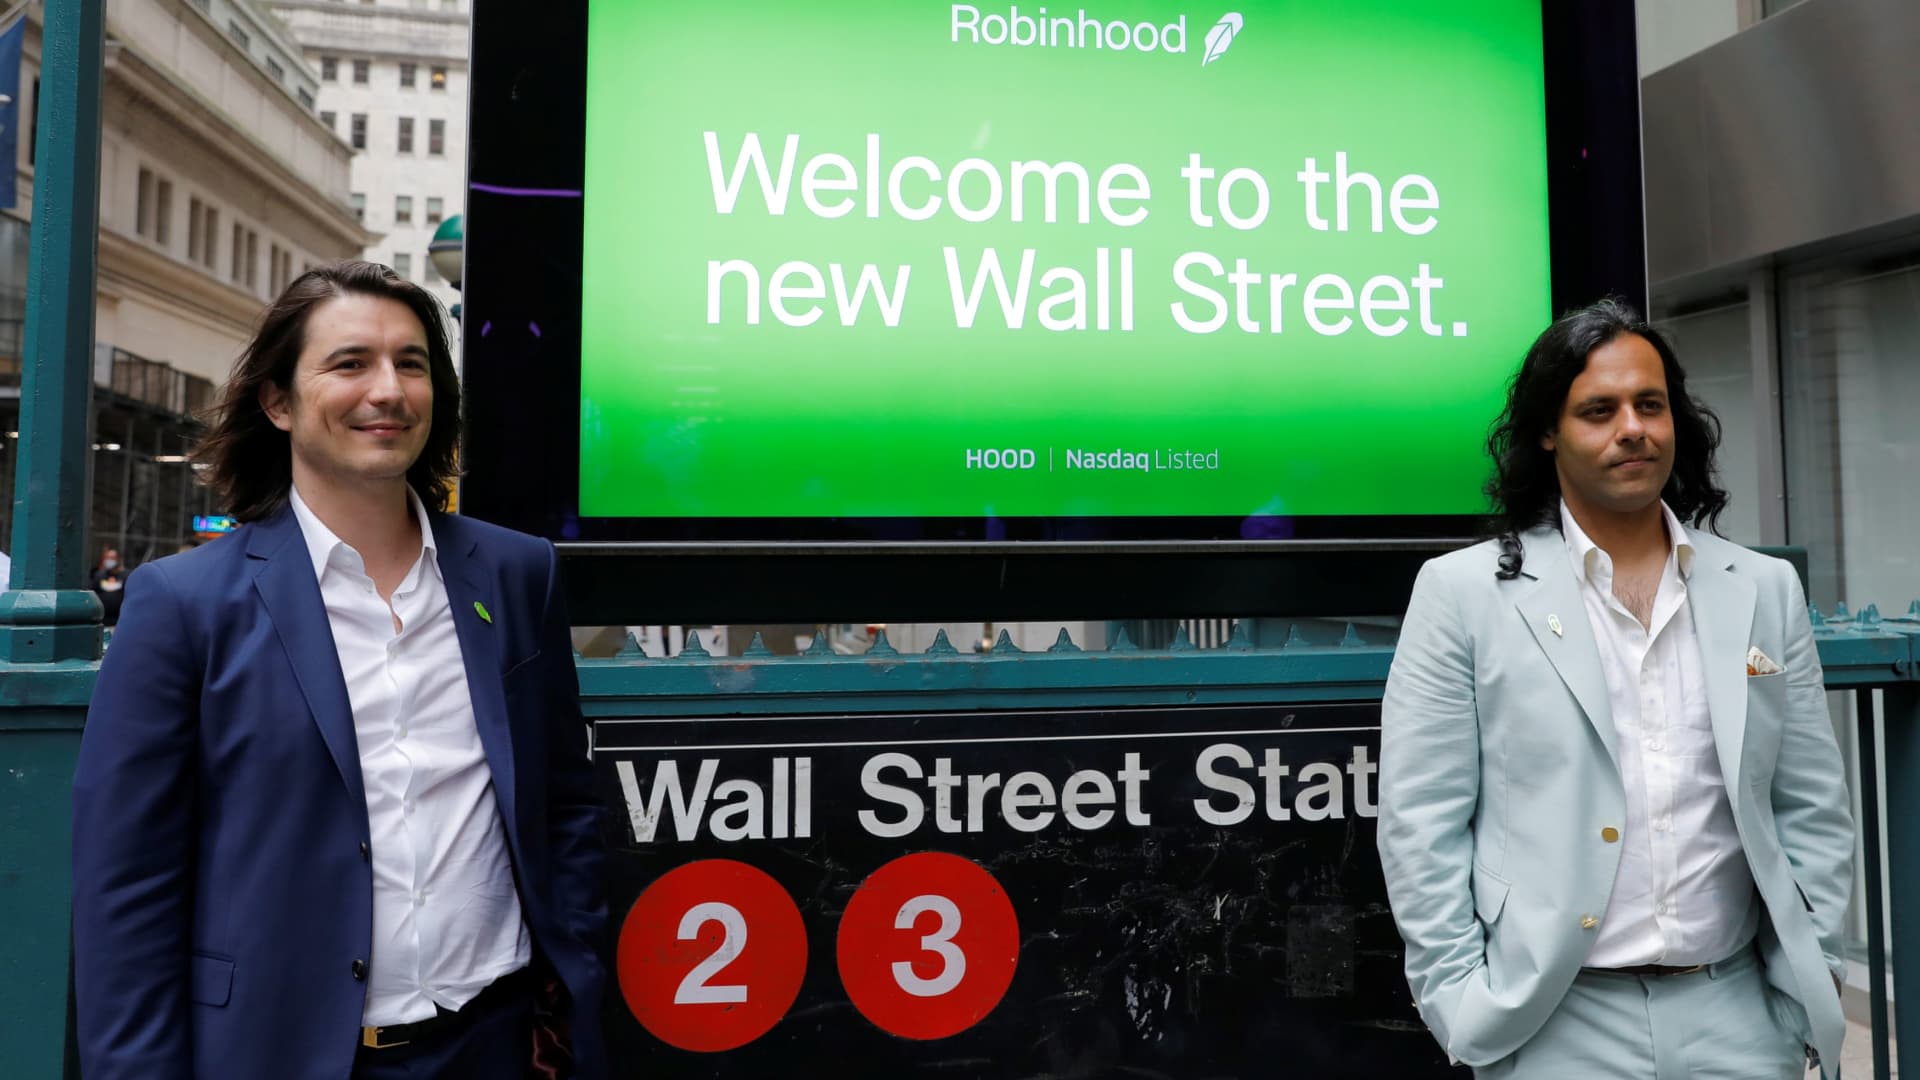 Stocks making the biggest moves after hours: PayPal, Robinhood, Qualcomm, Clorox, DoorDash and more